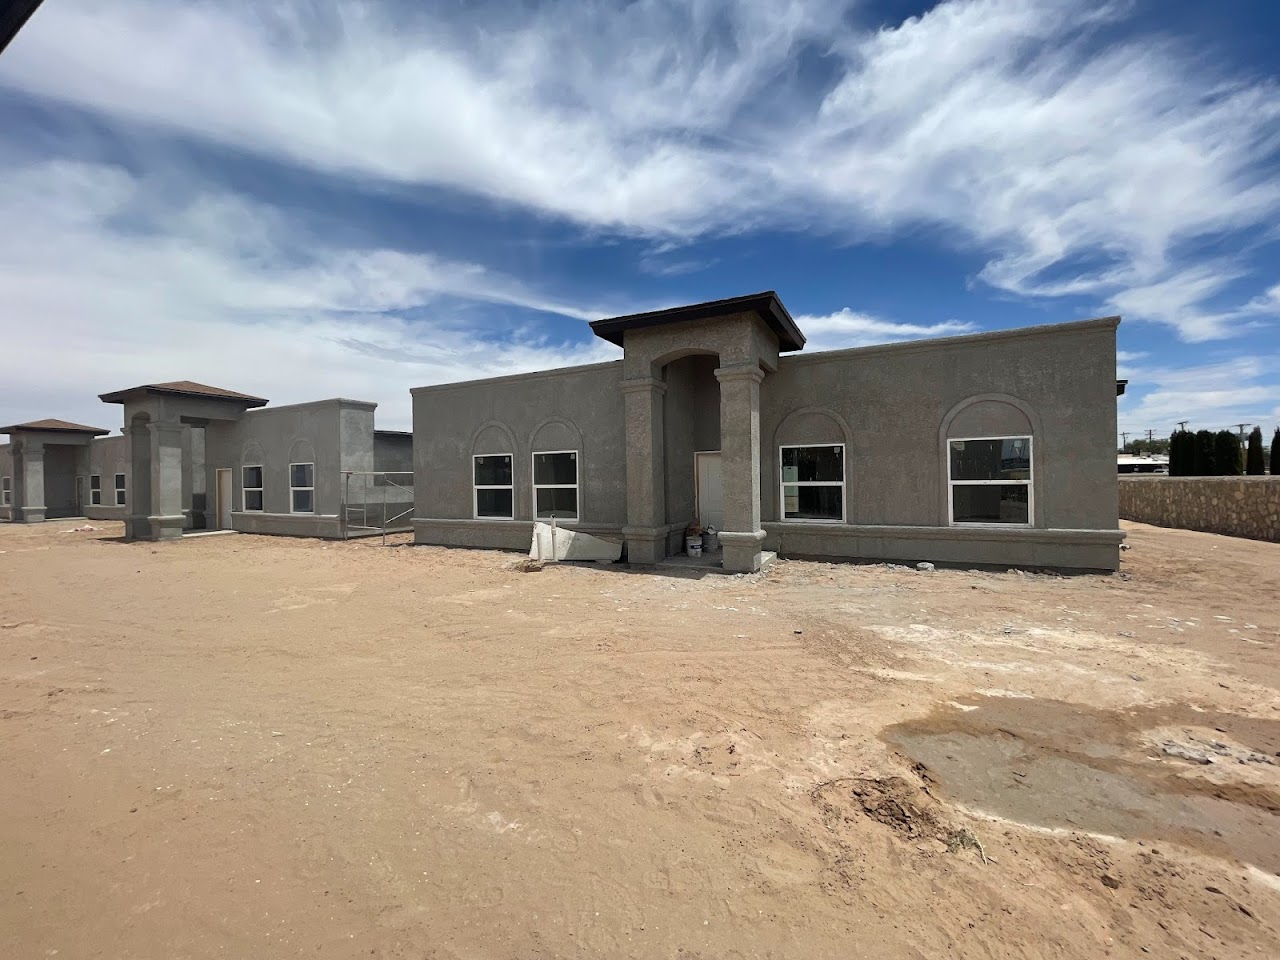 Photo of INKWOOD ESTATES. Affordable housing located at 107 S. SAN ELIZARIO ROAD CLINT, TX 79836